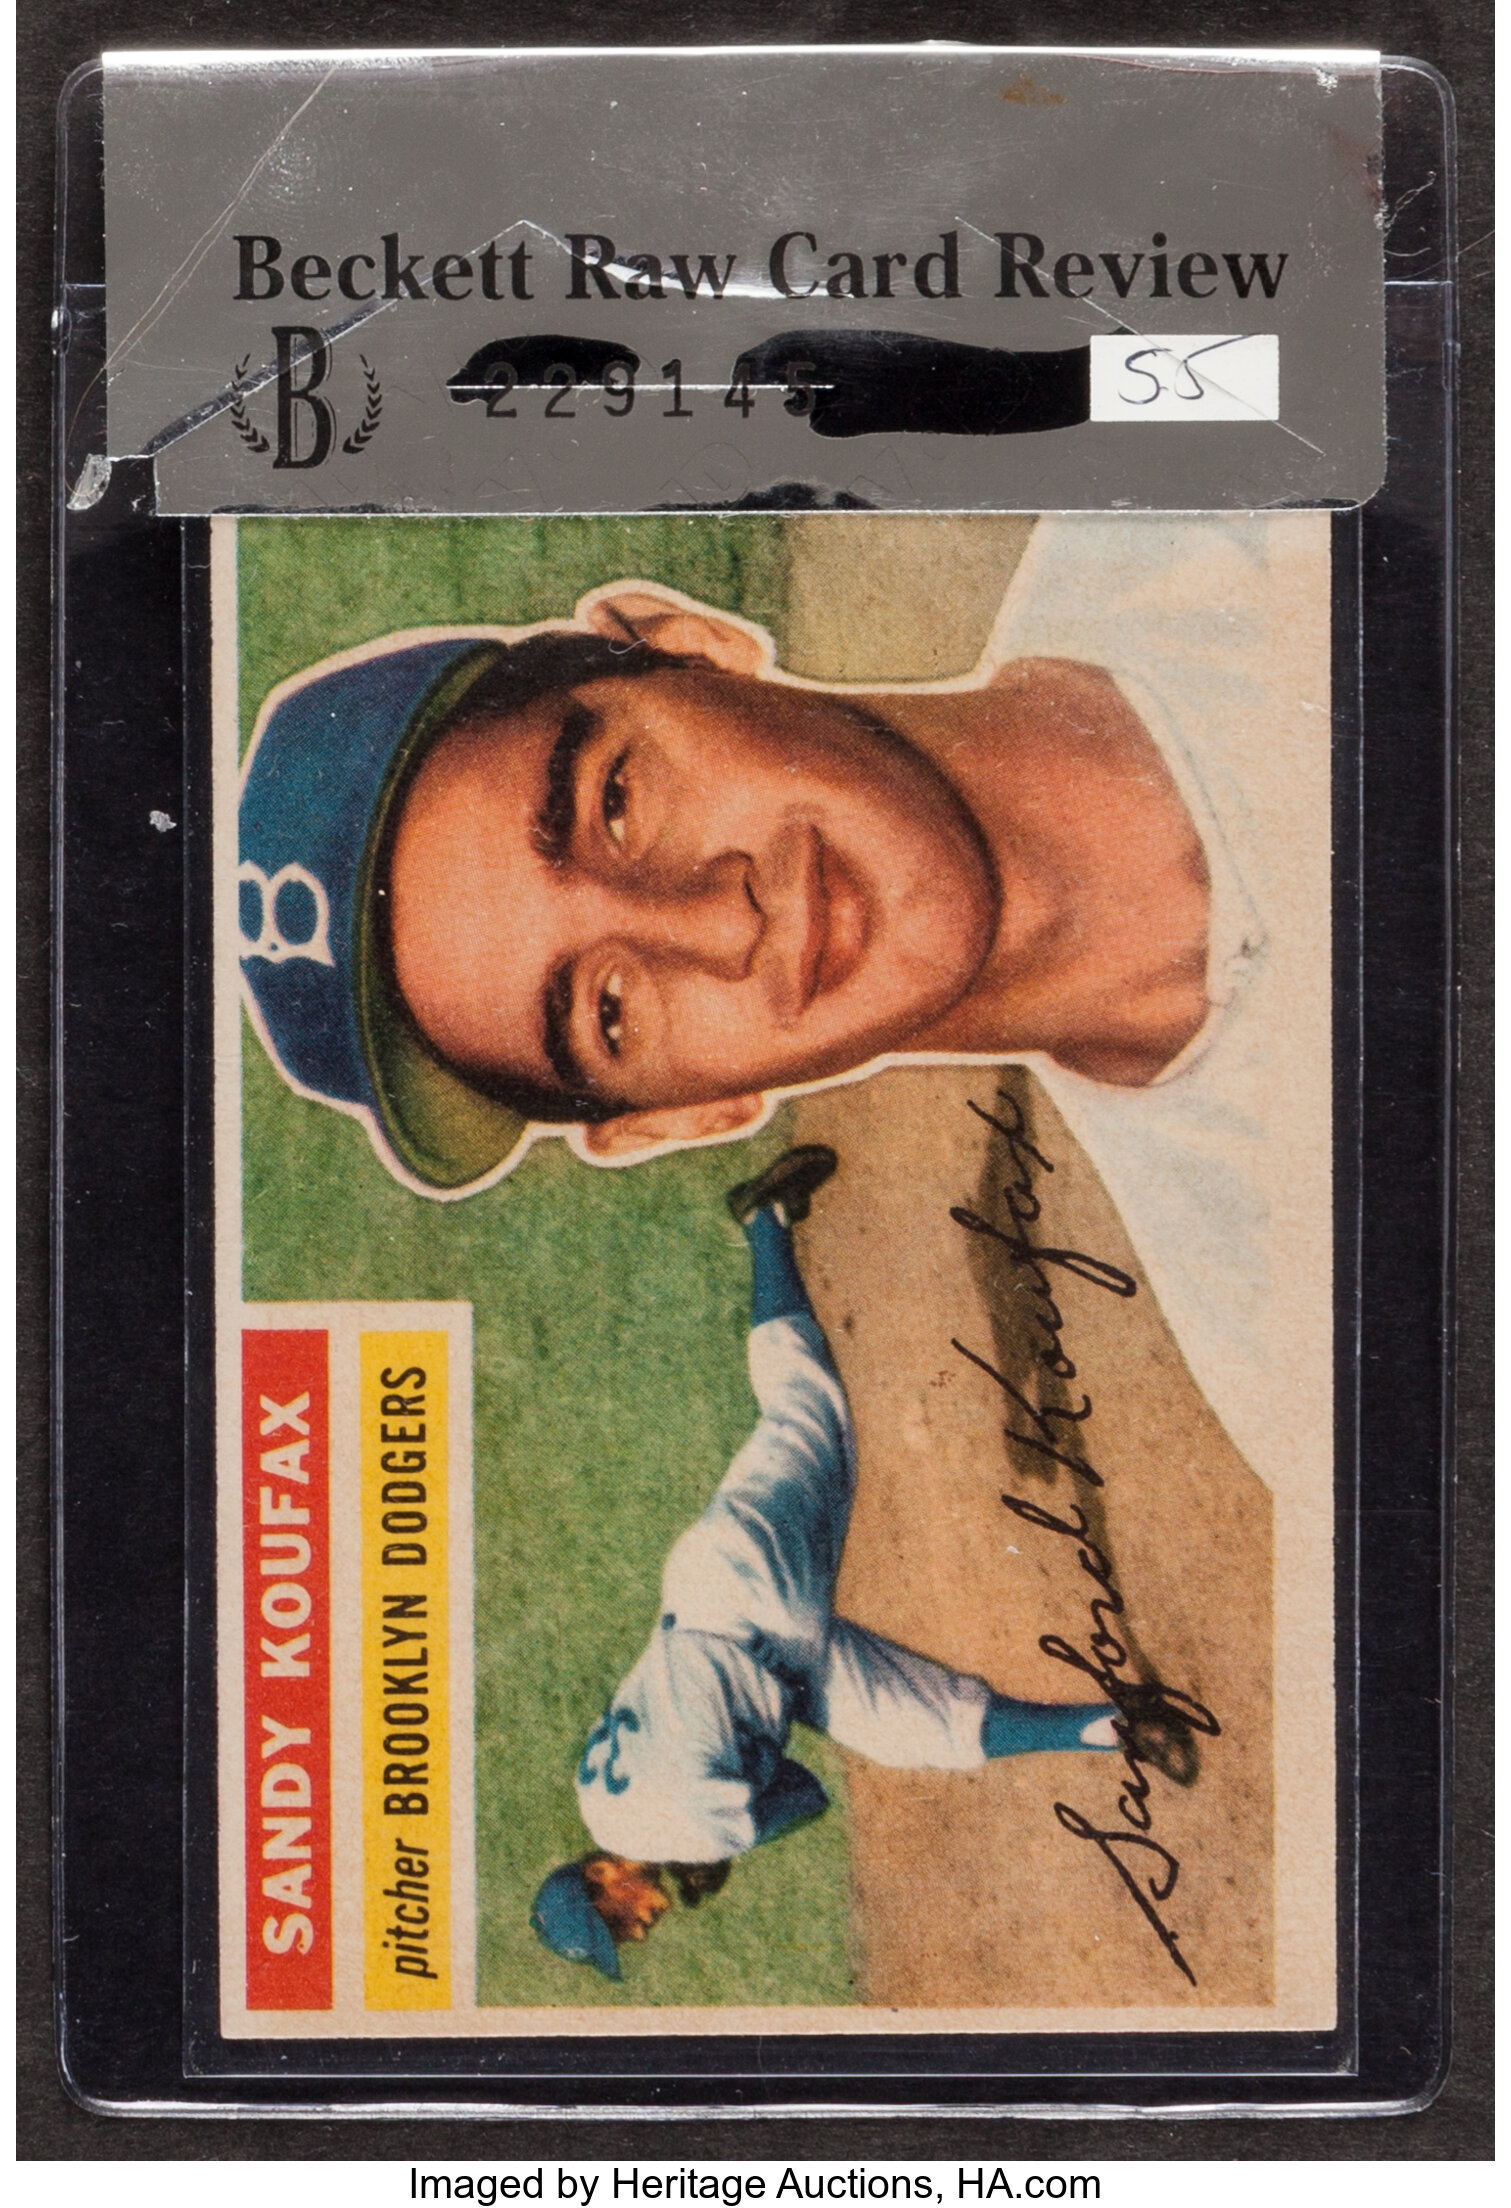 At Auction: 1956 Topps #164 Harmon Killebrew - 2nd Year Card